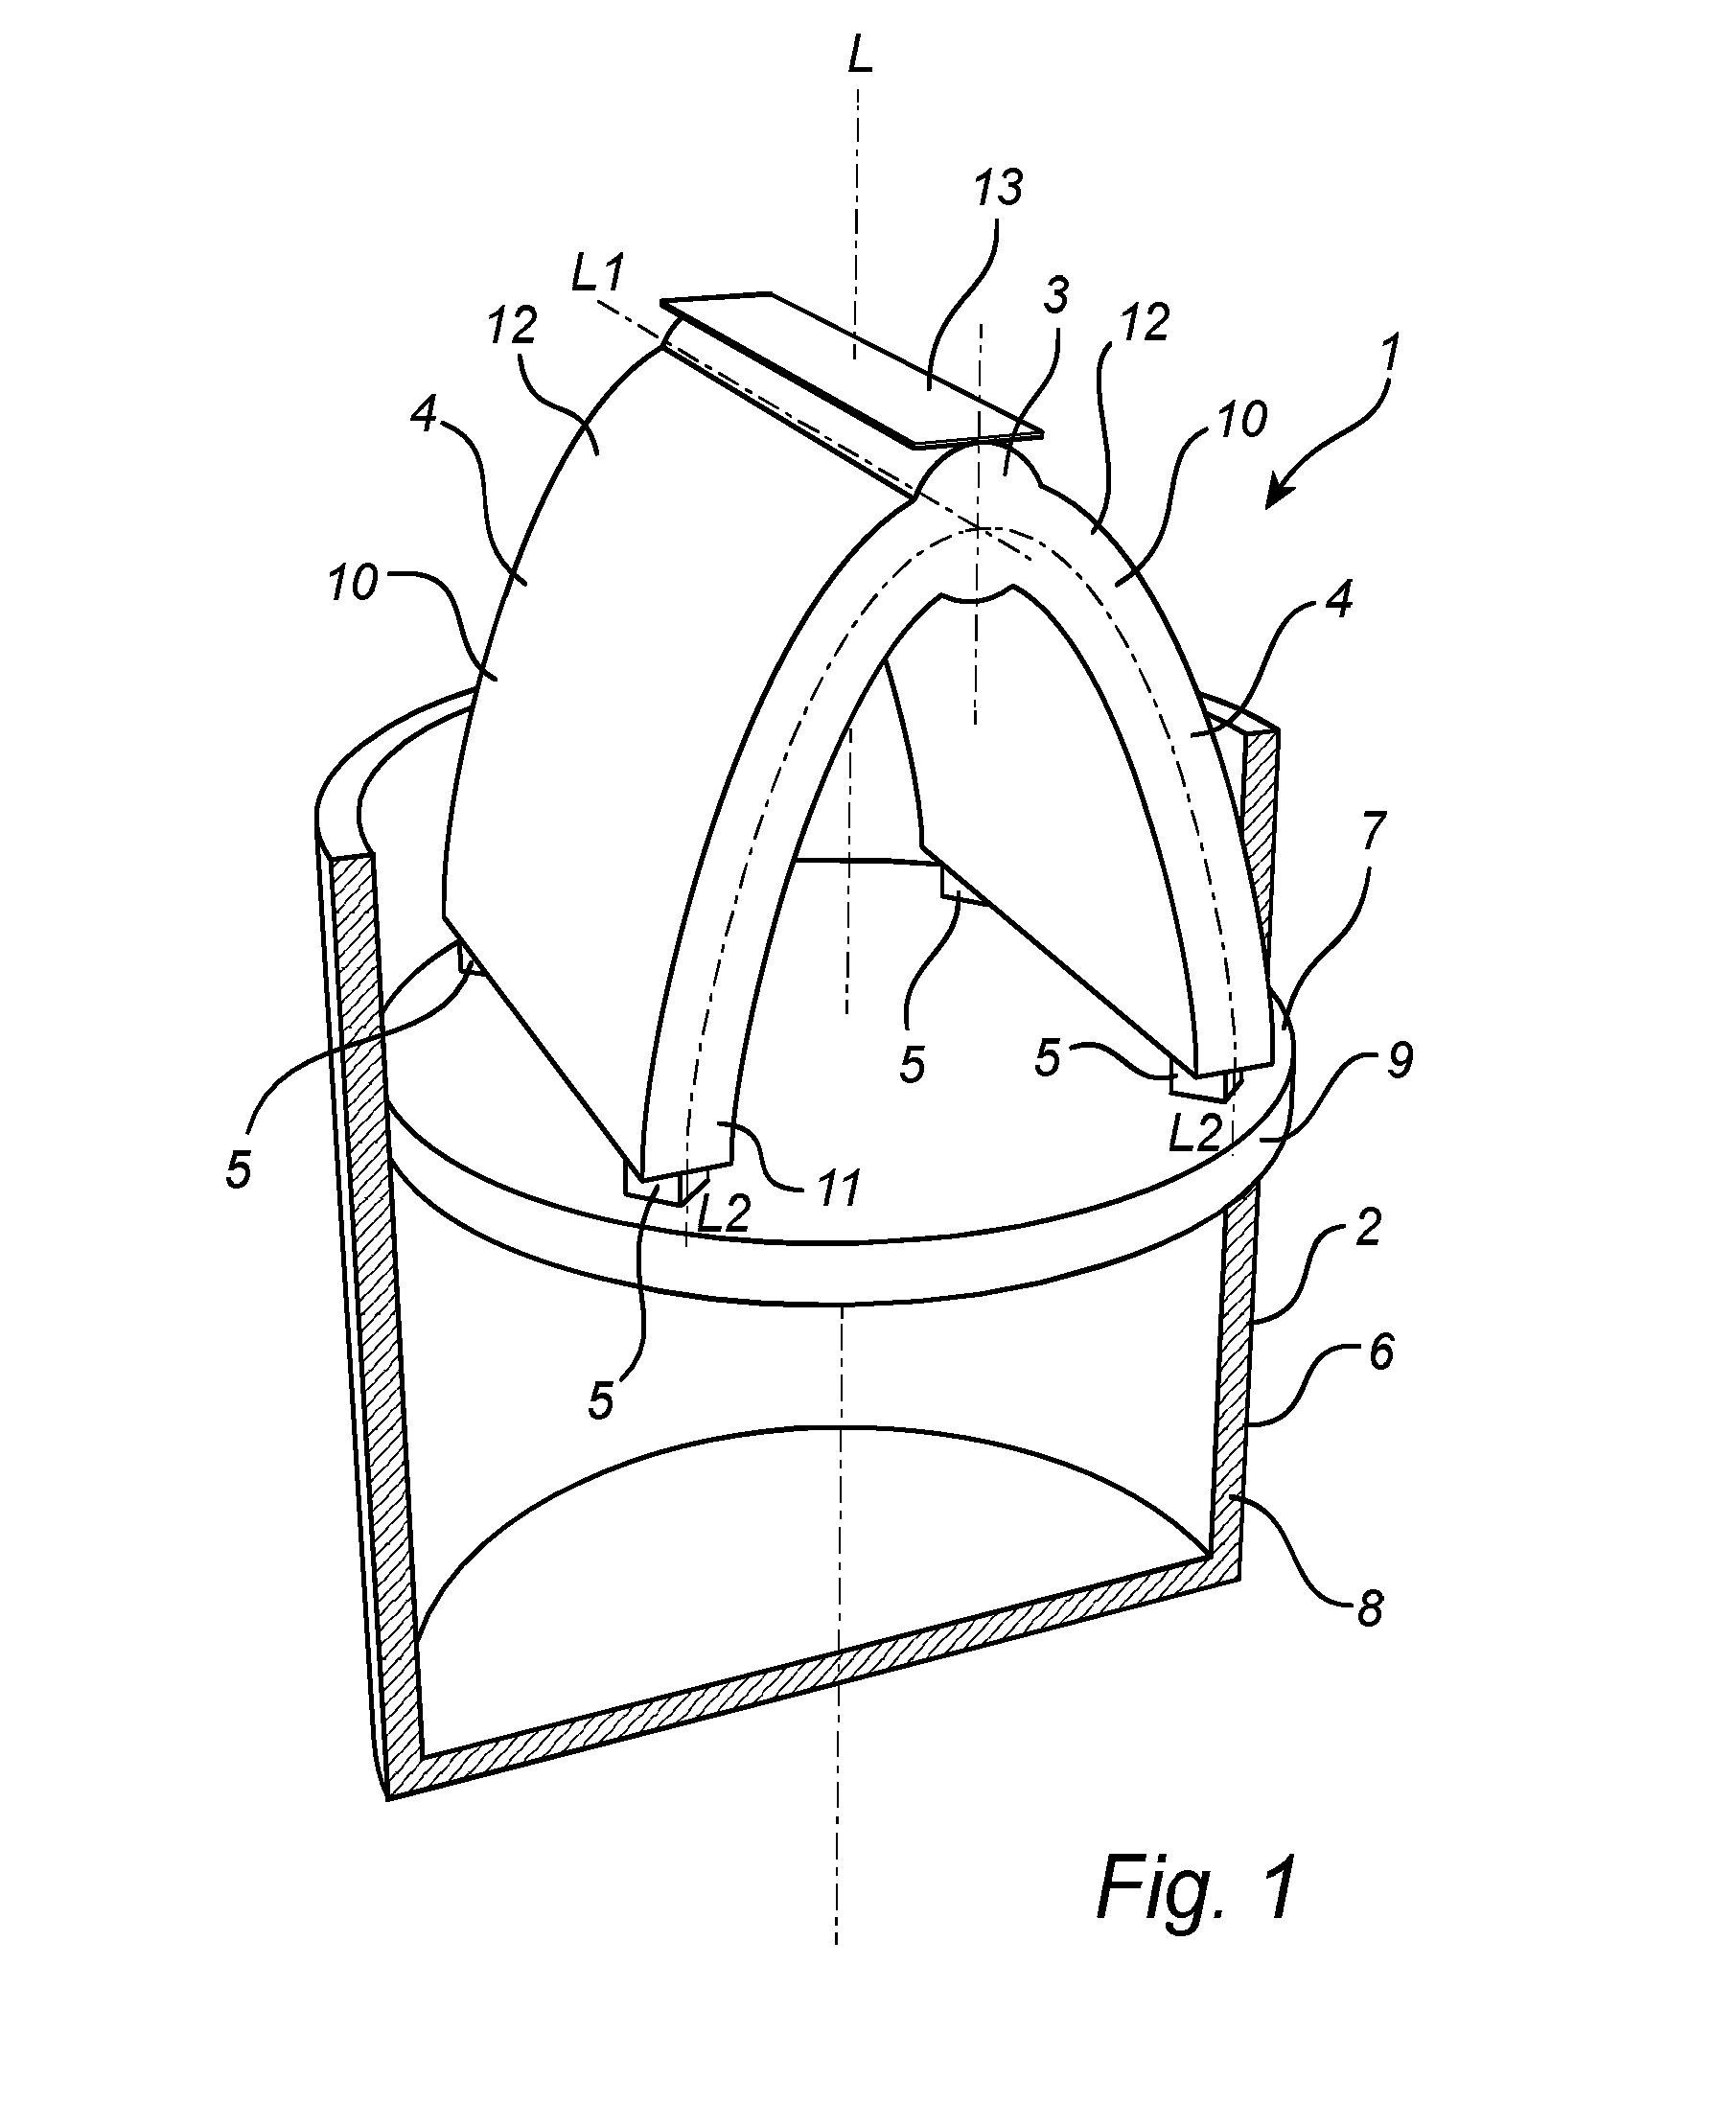 Lamp assembly